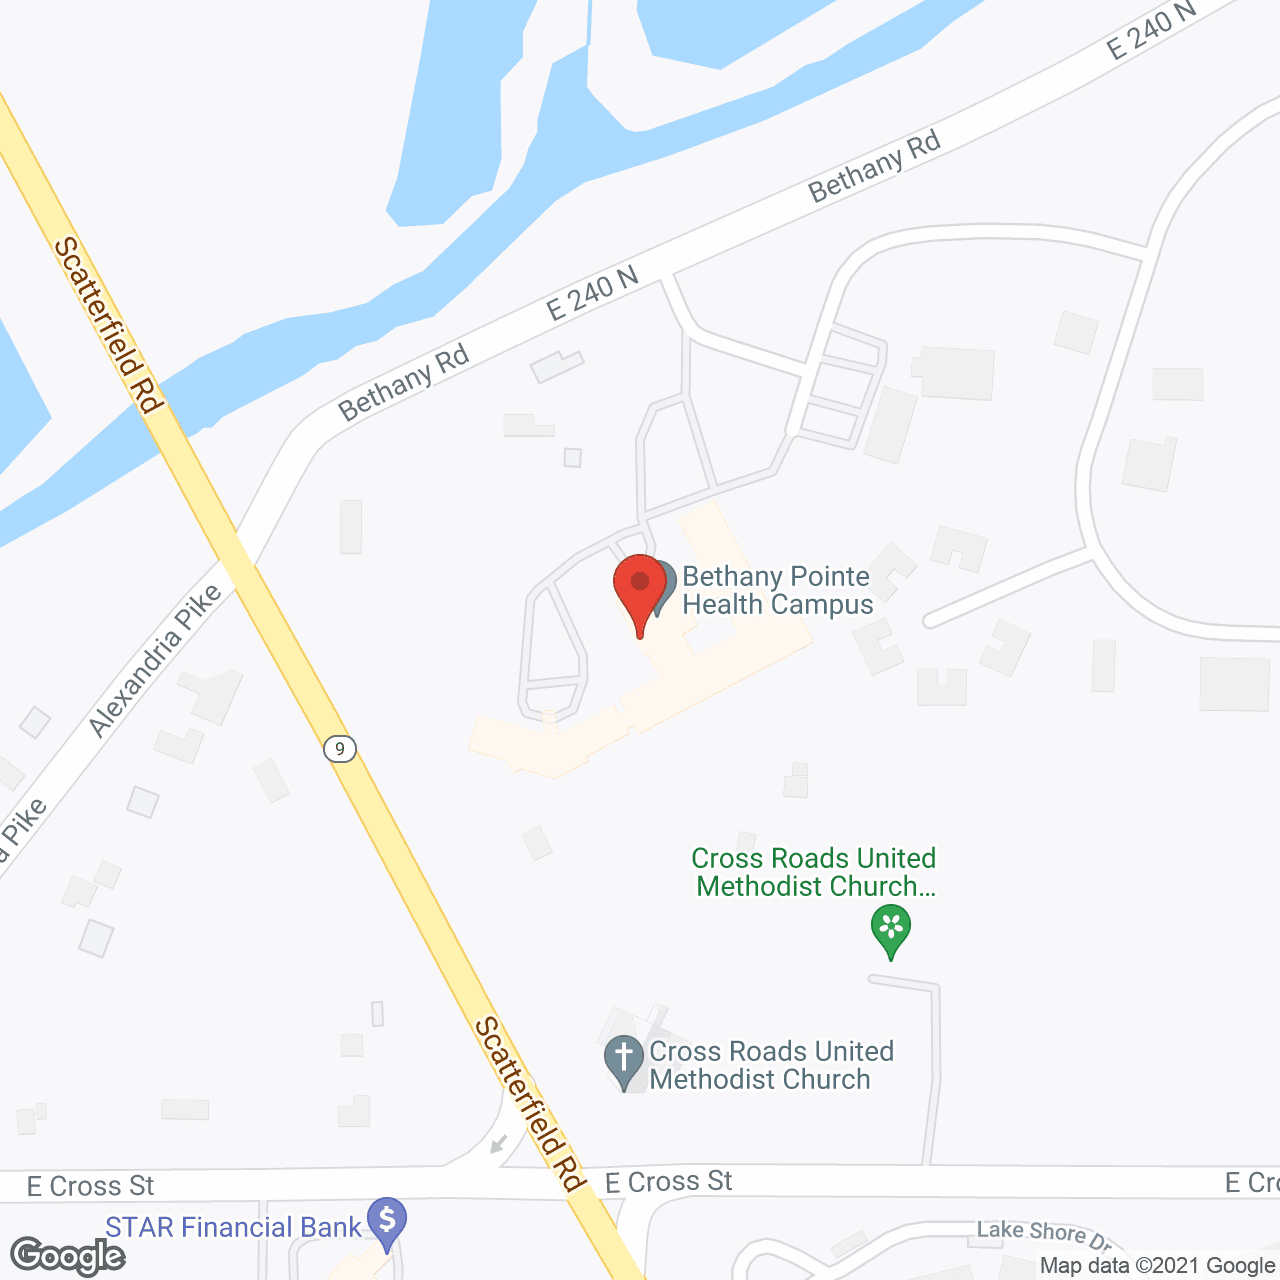 Bethany Pointe Health Campus in google map